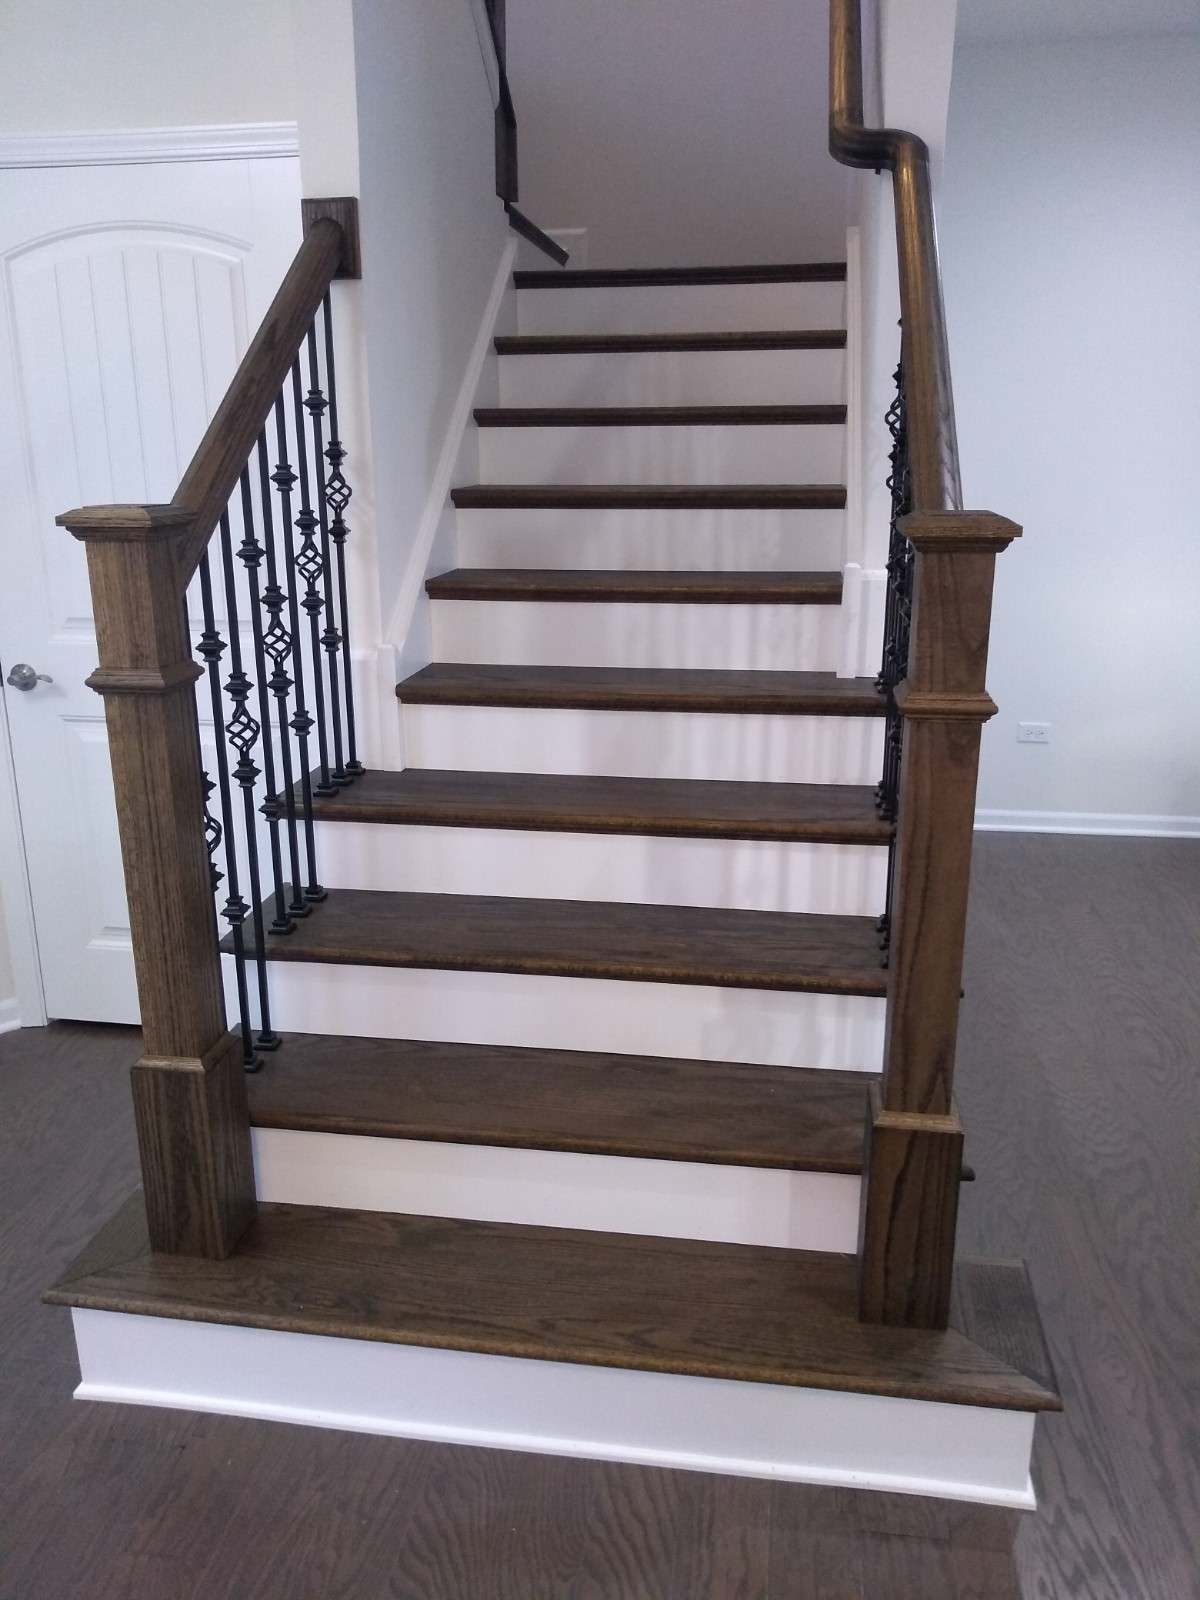 Upgrade of Builder's Staircase